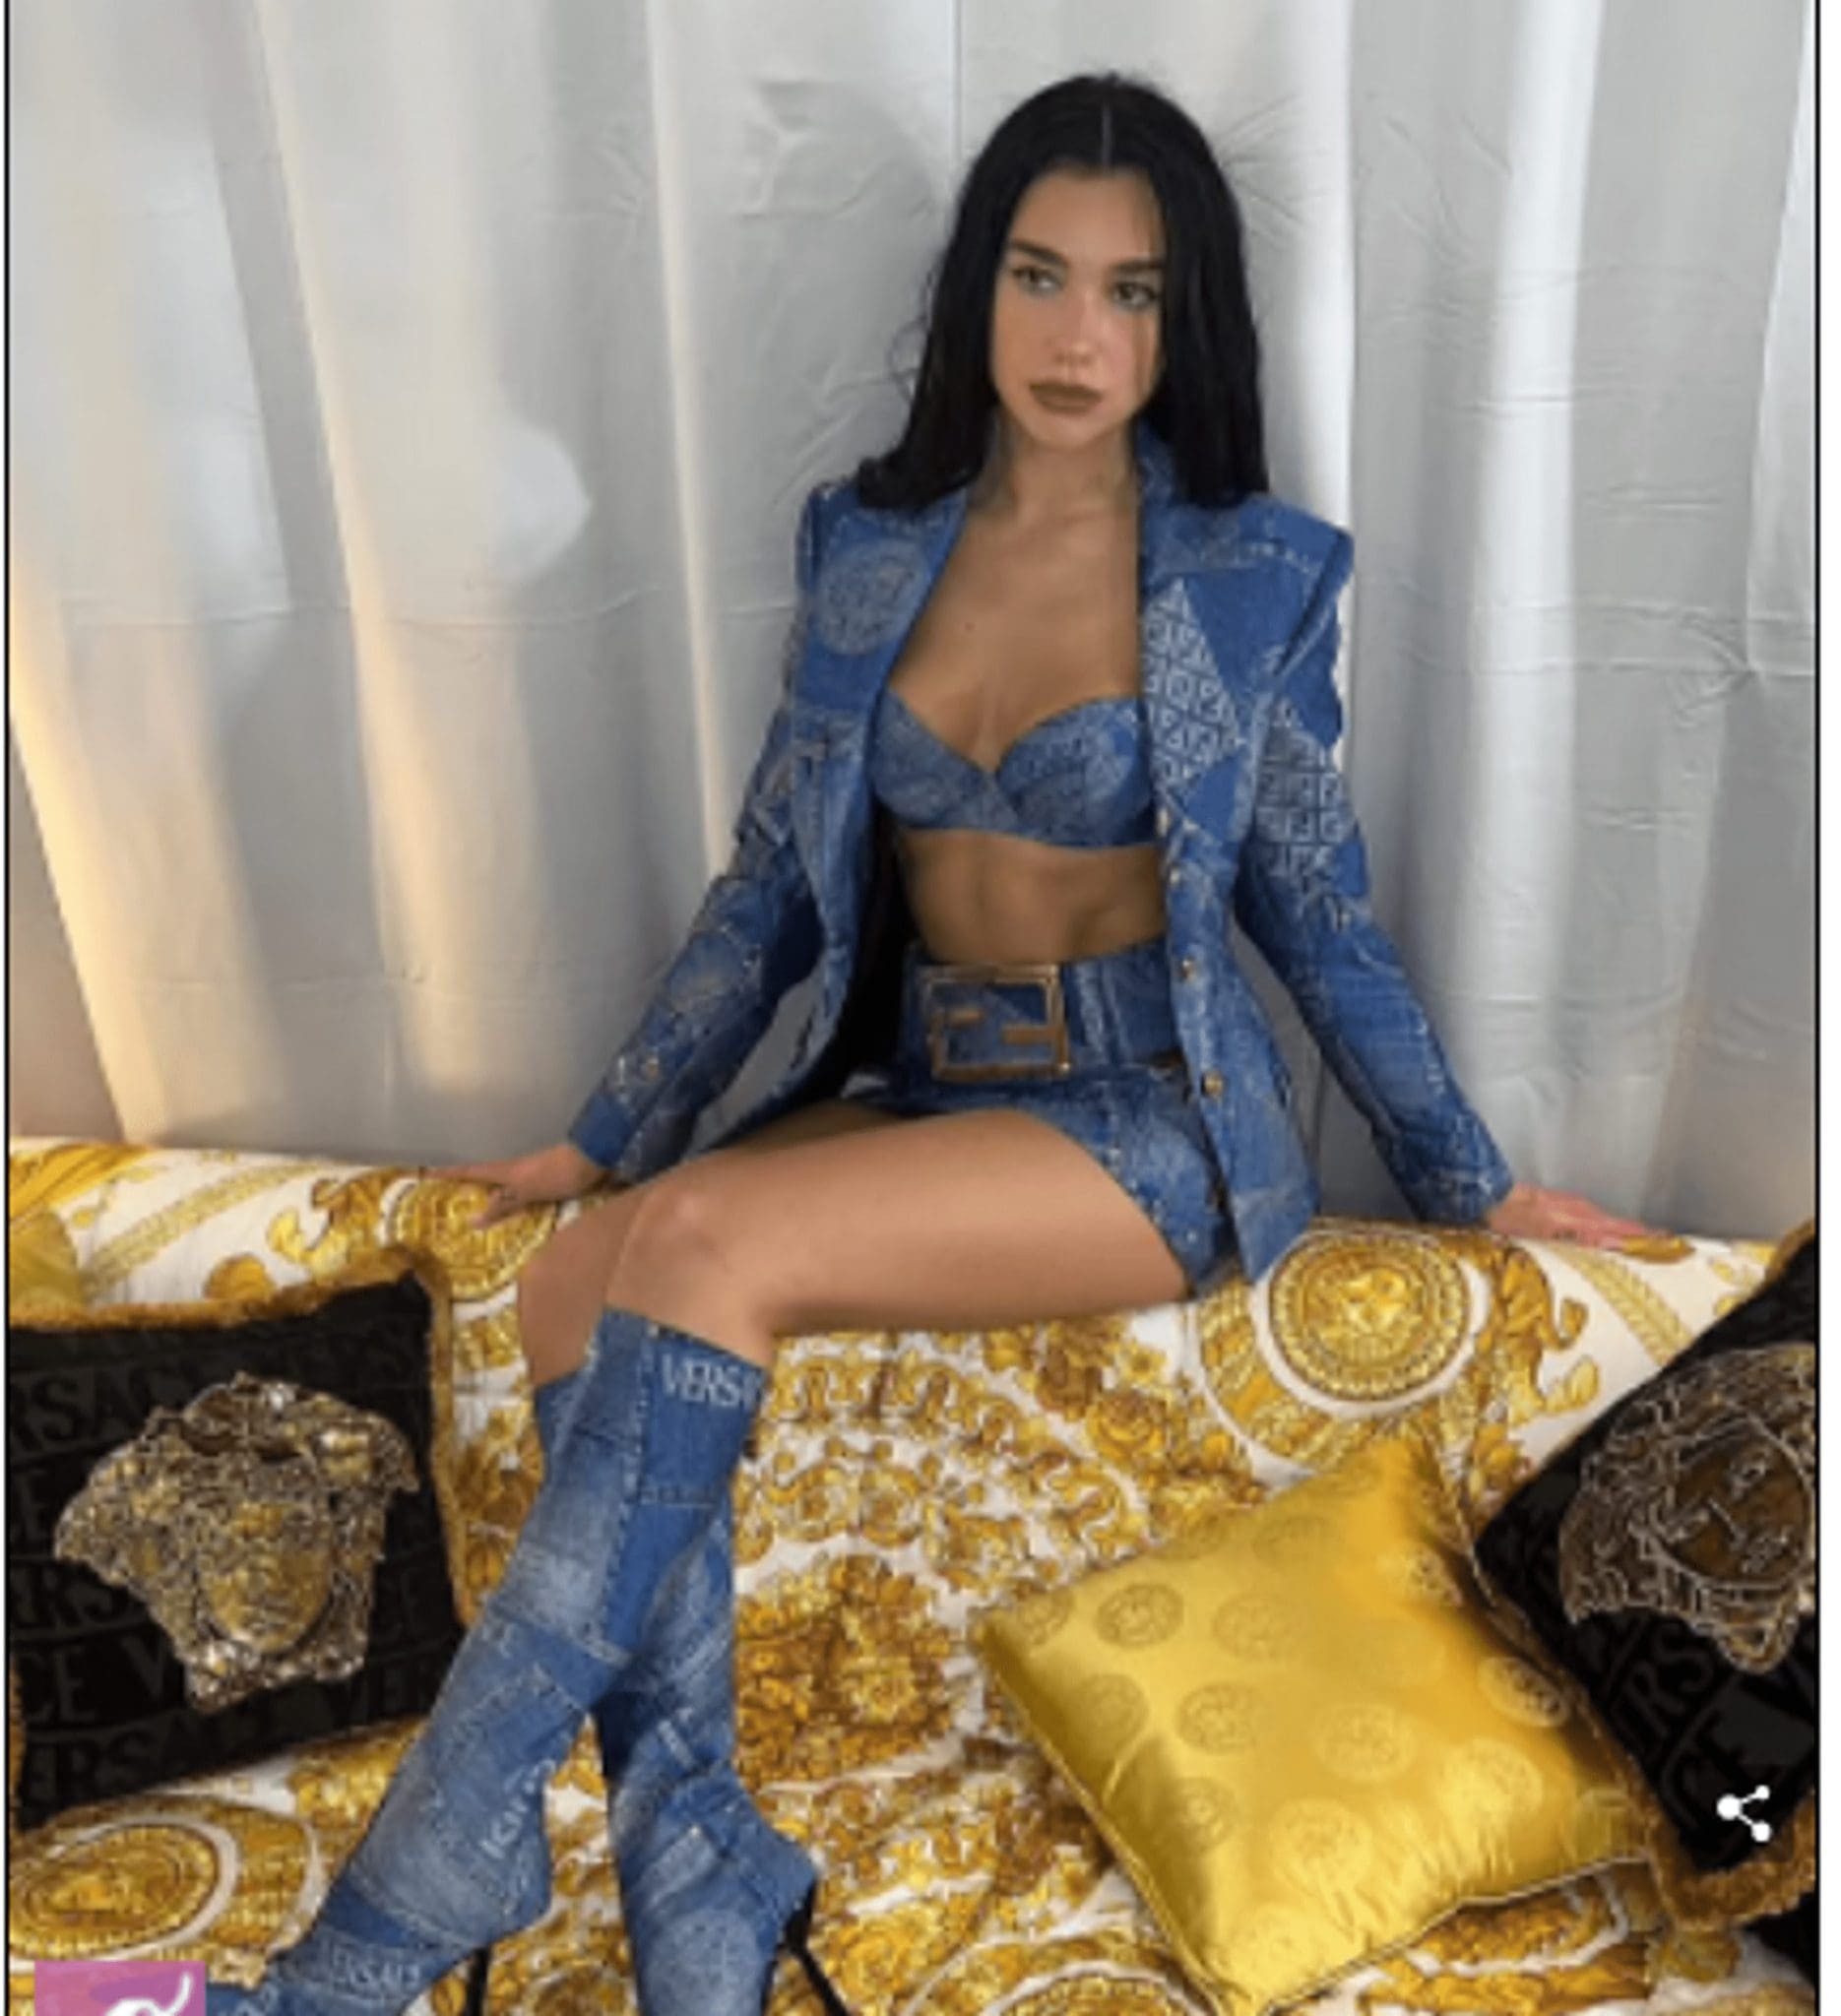 Dua Lipa surprised fans with a bold denim look from Fendace